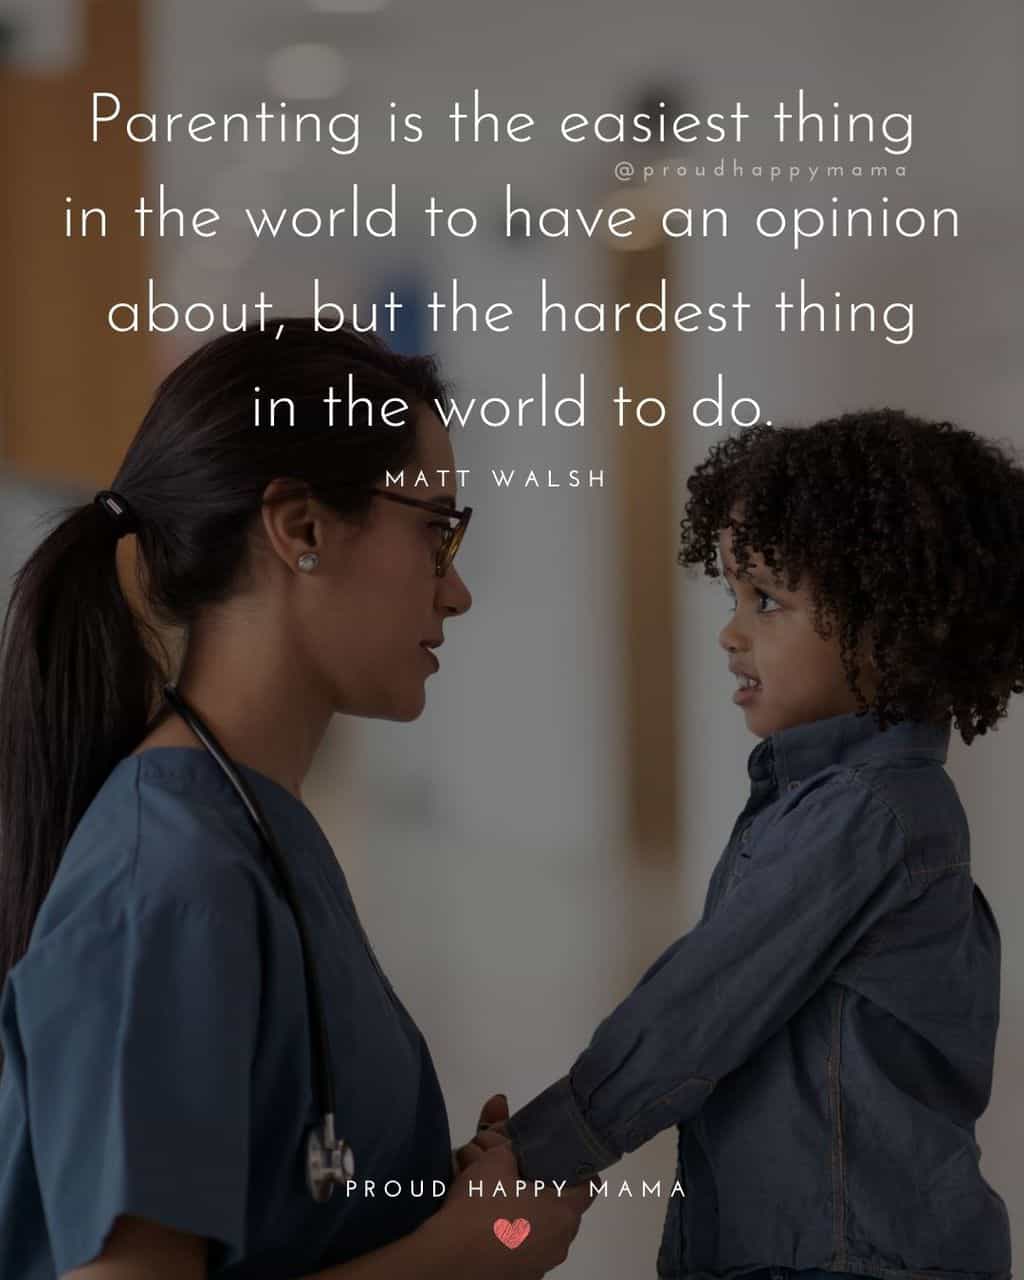 Parenting Quotes - Parenting is the easiest thing in the world to have an opinion about, but the hardest thing in the world to do.’ – Matt